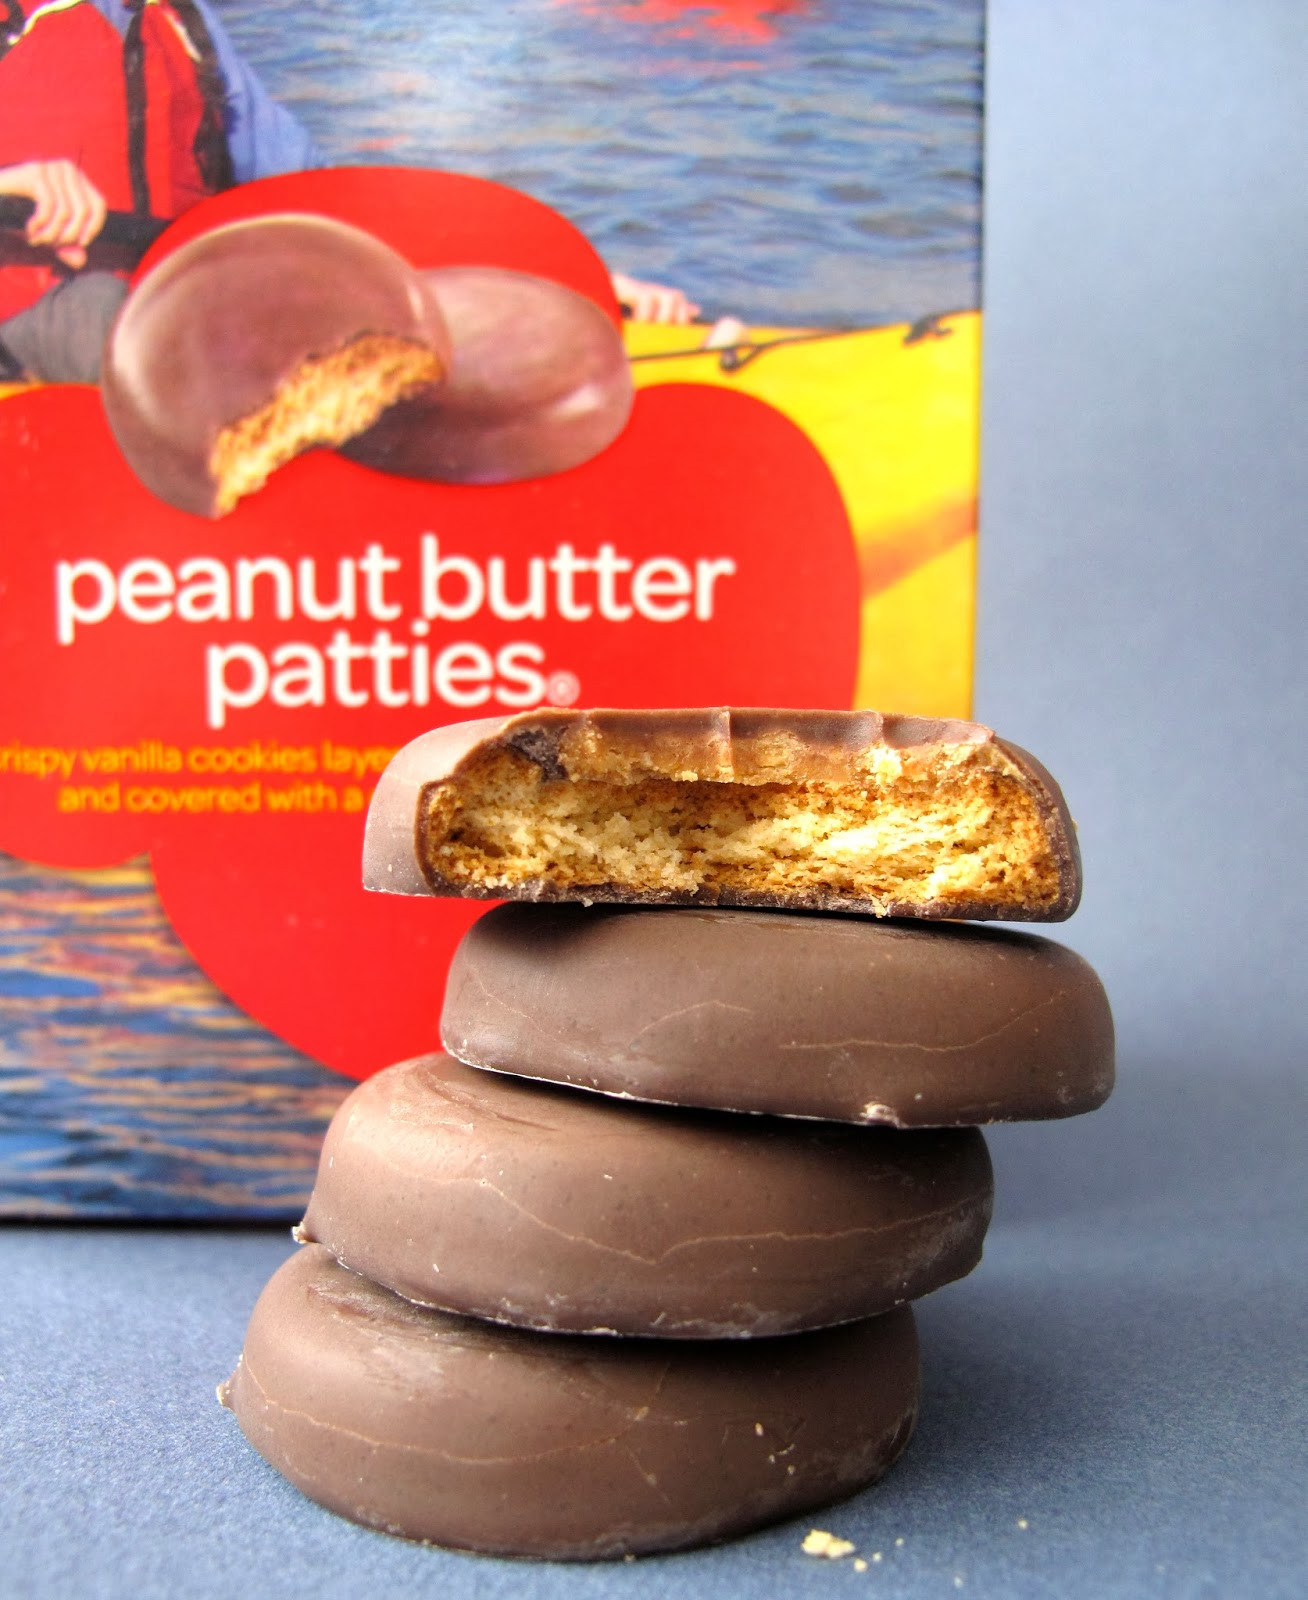 Girl Scouts Cookies Peanut Butter
 The Laziest Vegans in the World Vegan Girl Scout Cookies